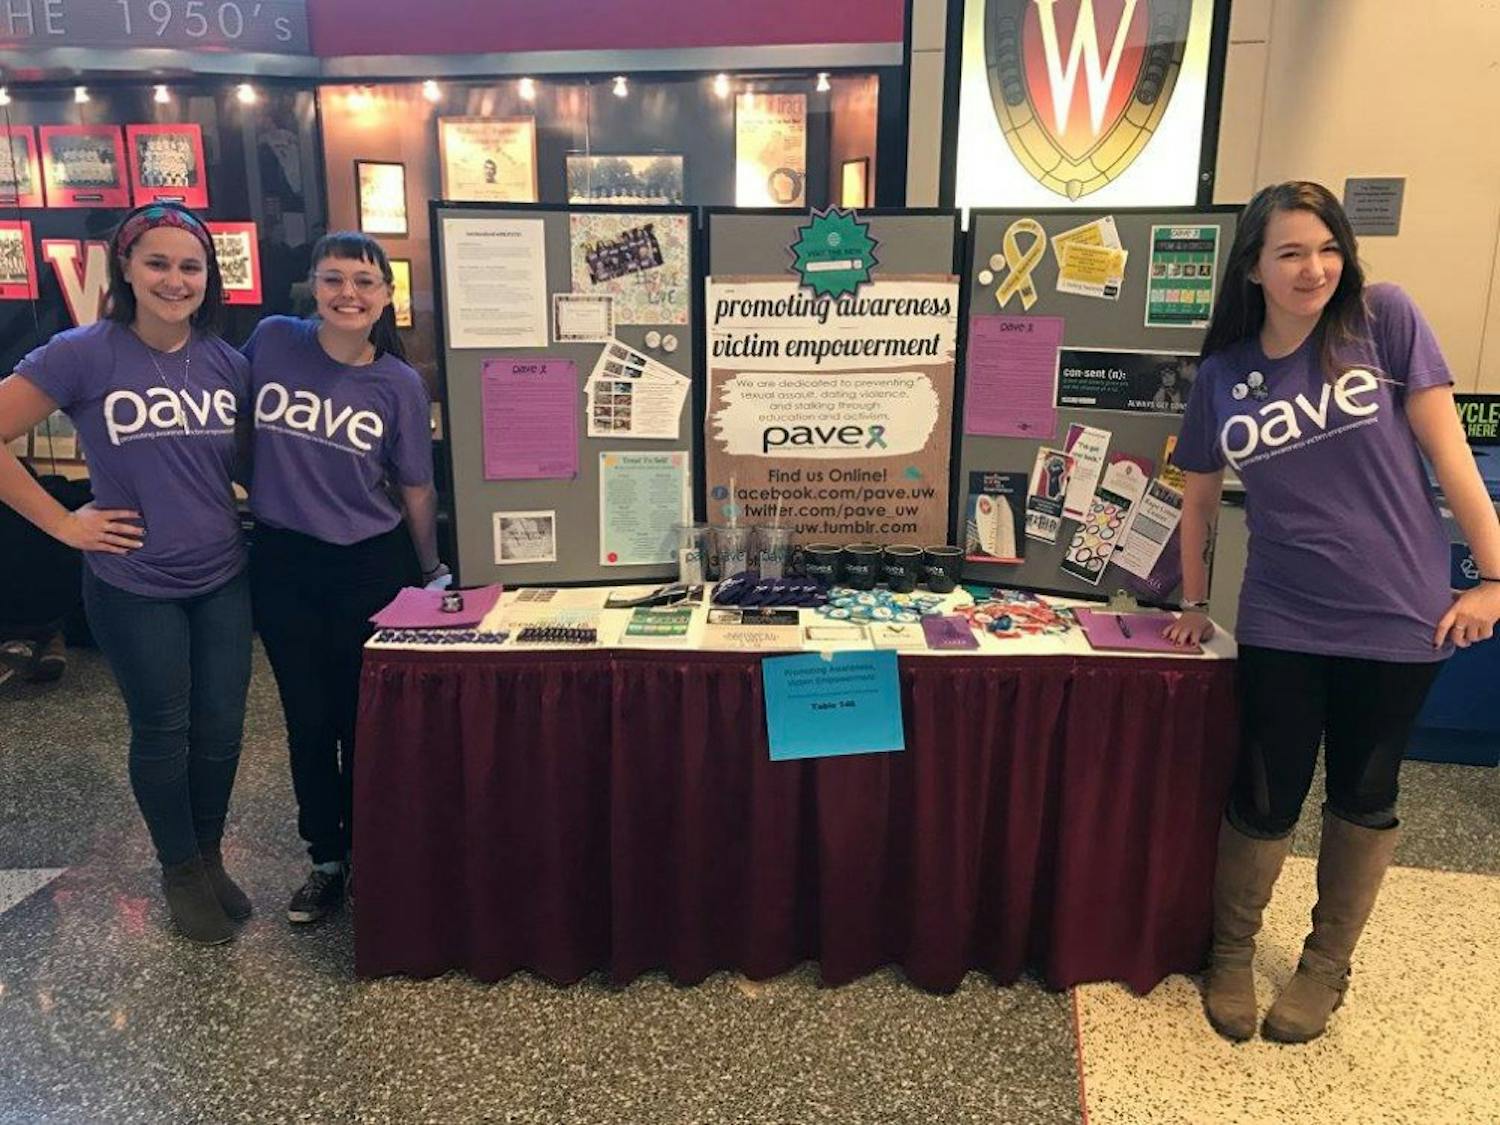 Promoting Awareness Victim Empowerment is a student advocacy group on the UW-Madison campus dedicated to ending sexual assault, dating violence, and stalking through education and activism.